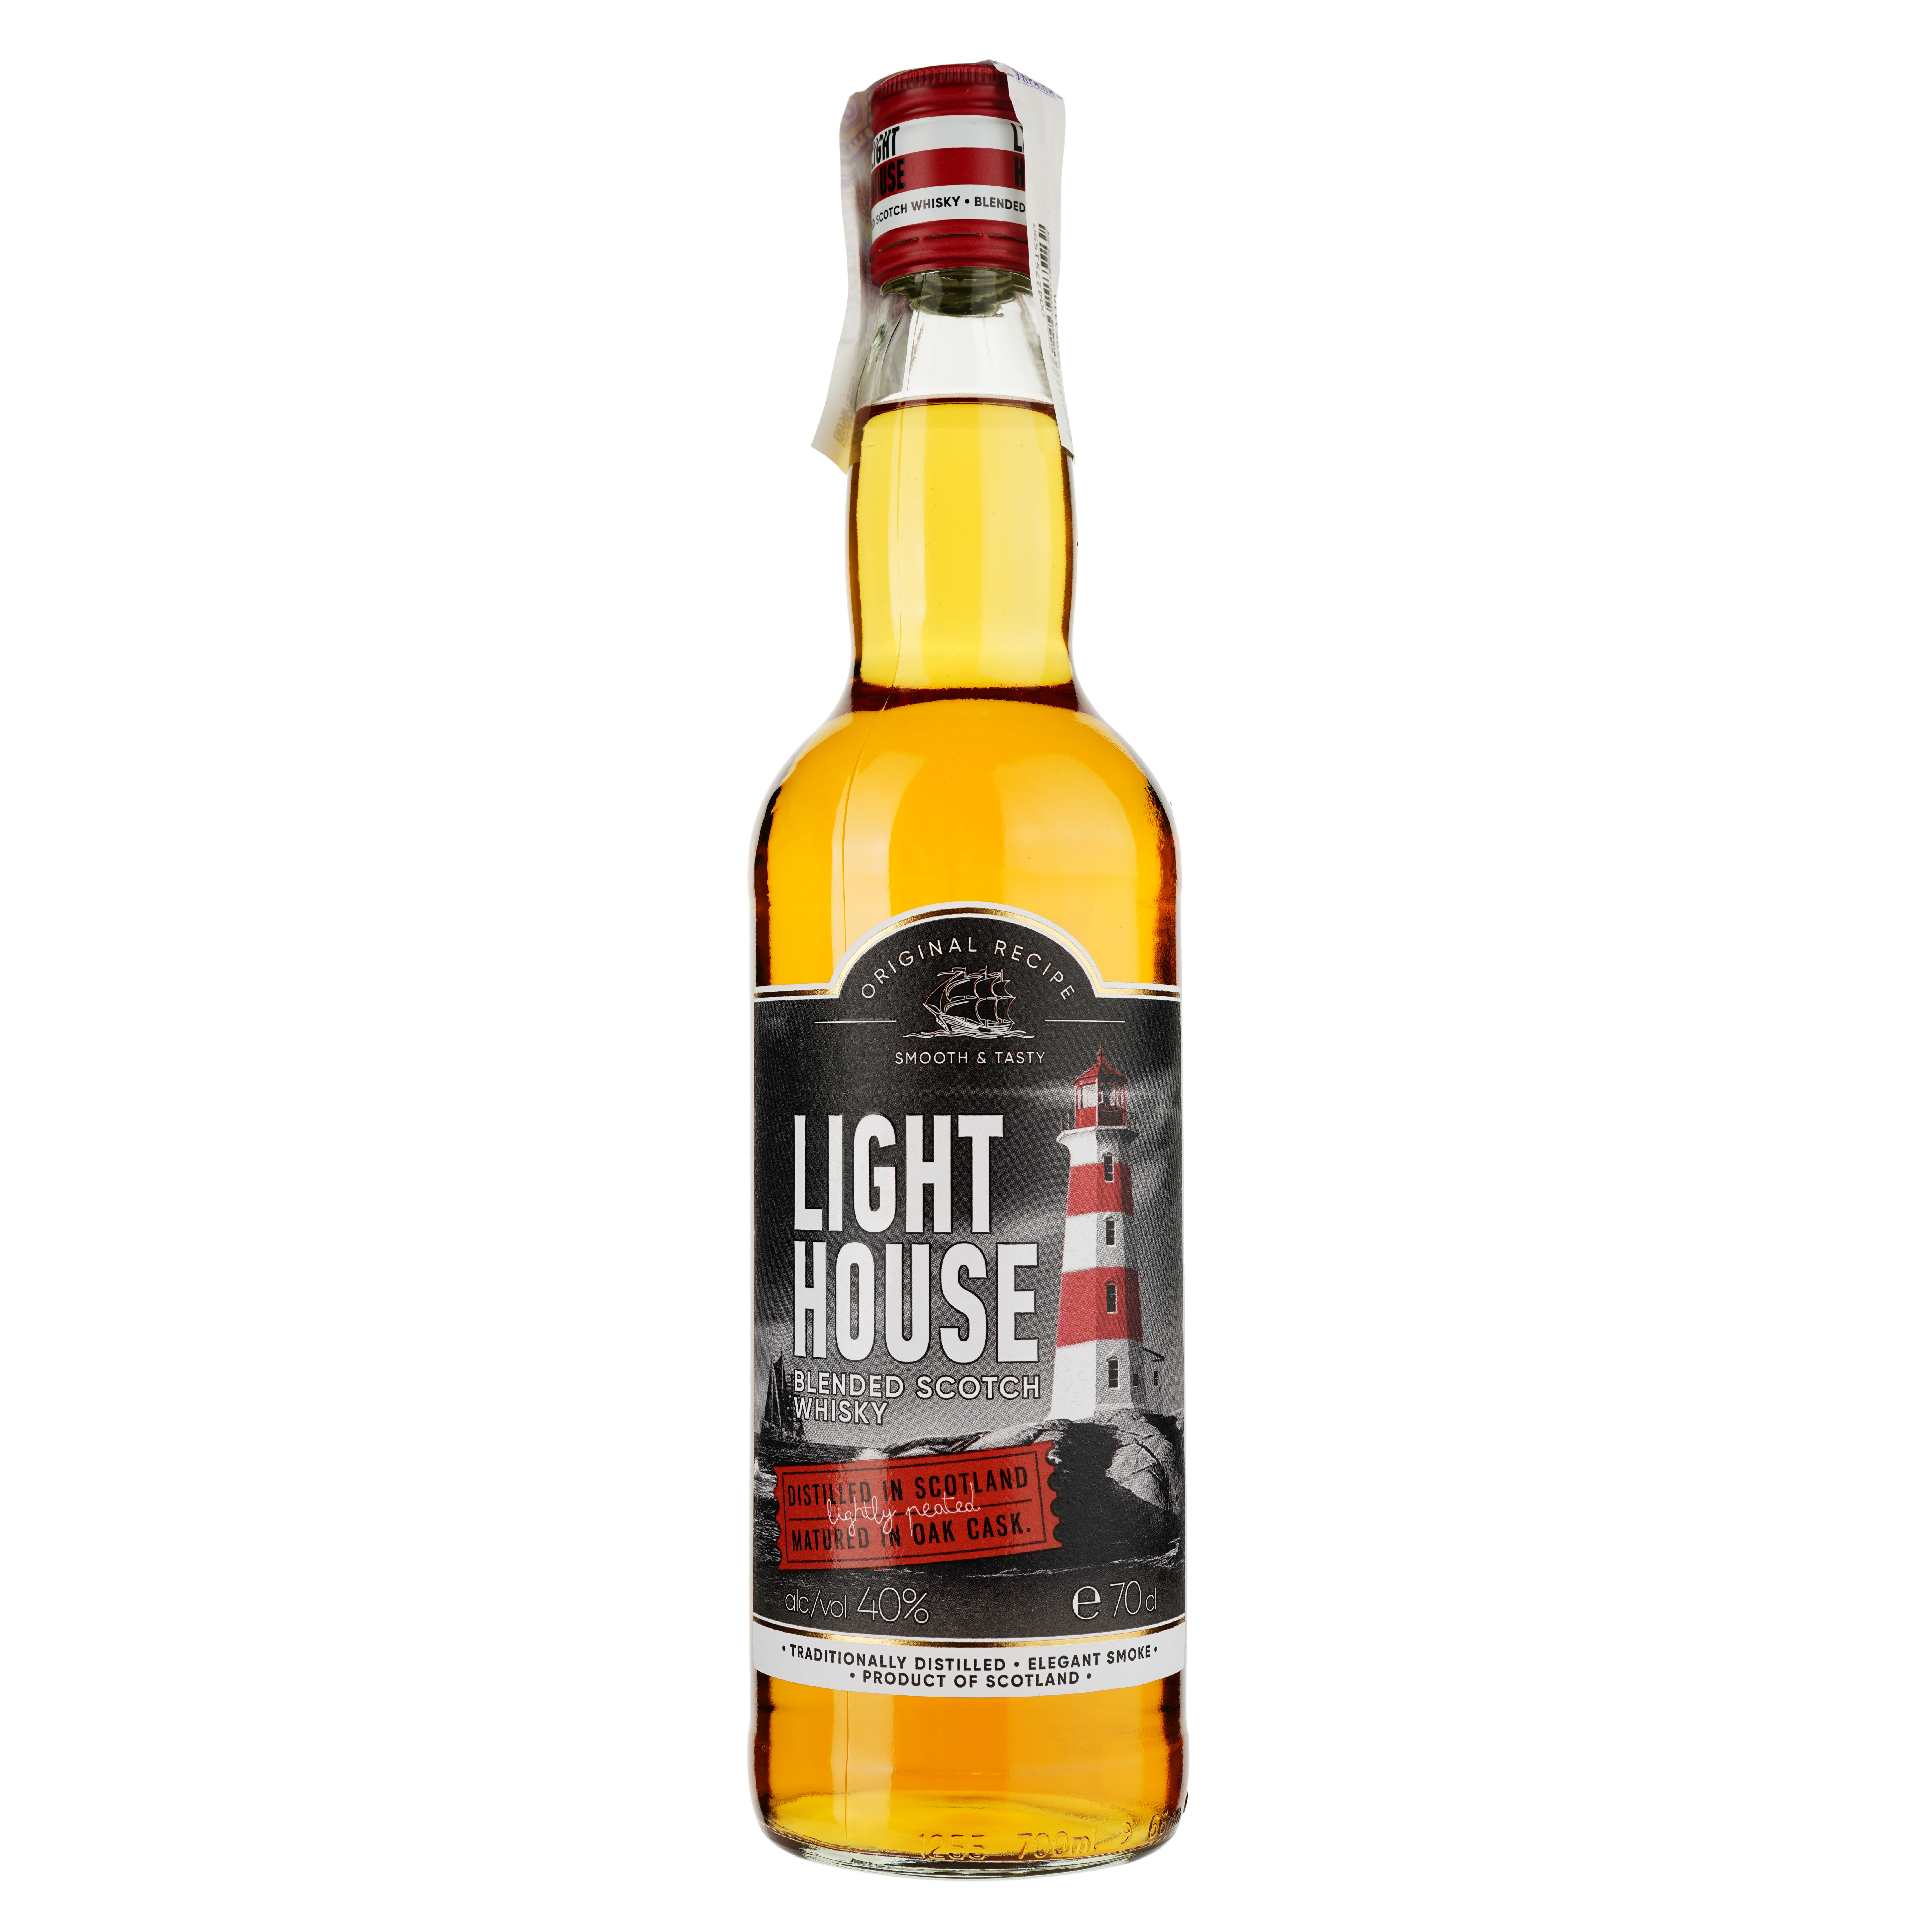 Виски Lighthouse Blended Scotch Whisky Peated 40% 0.7 л - фото 1